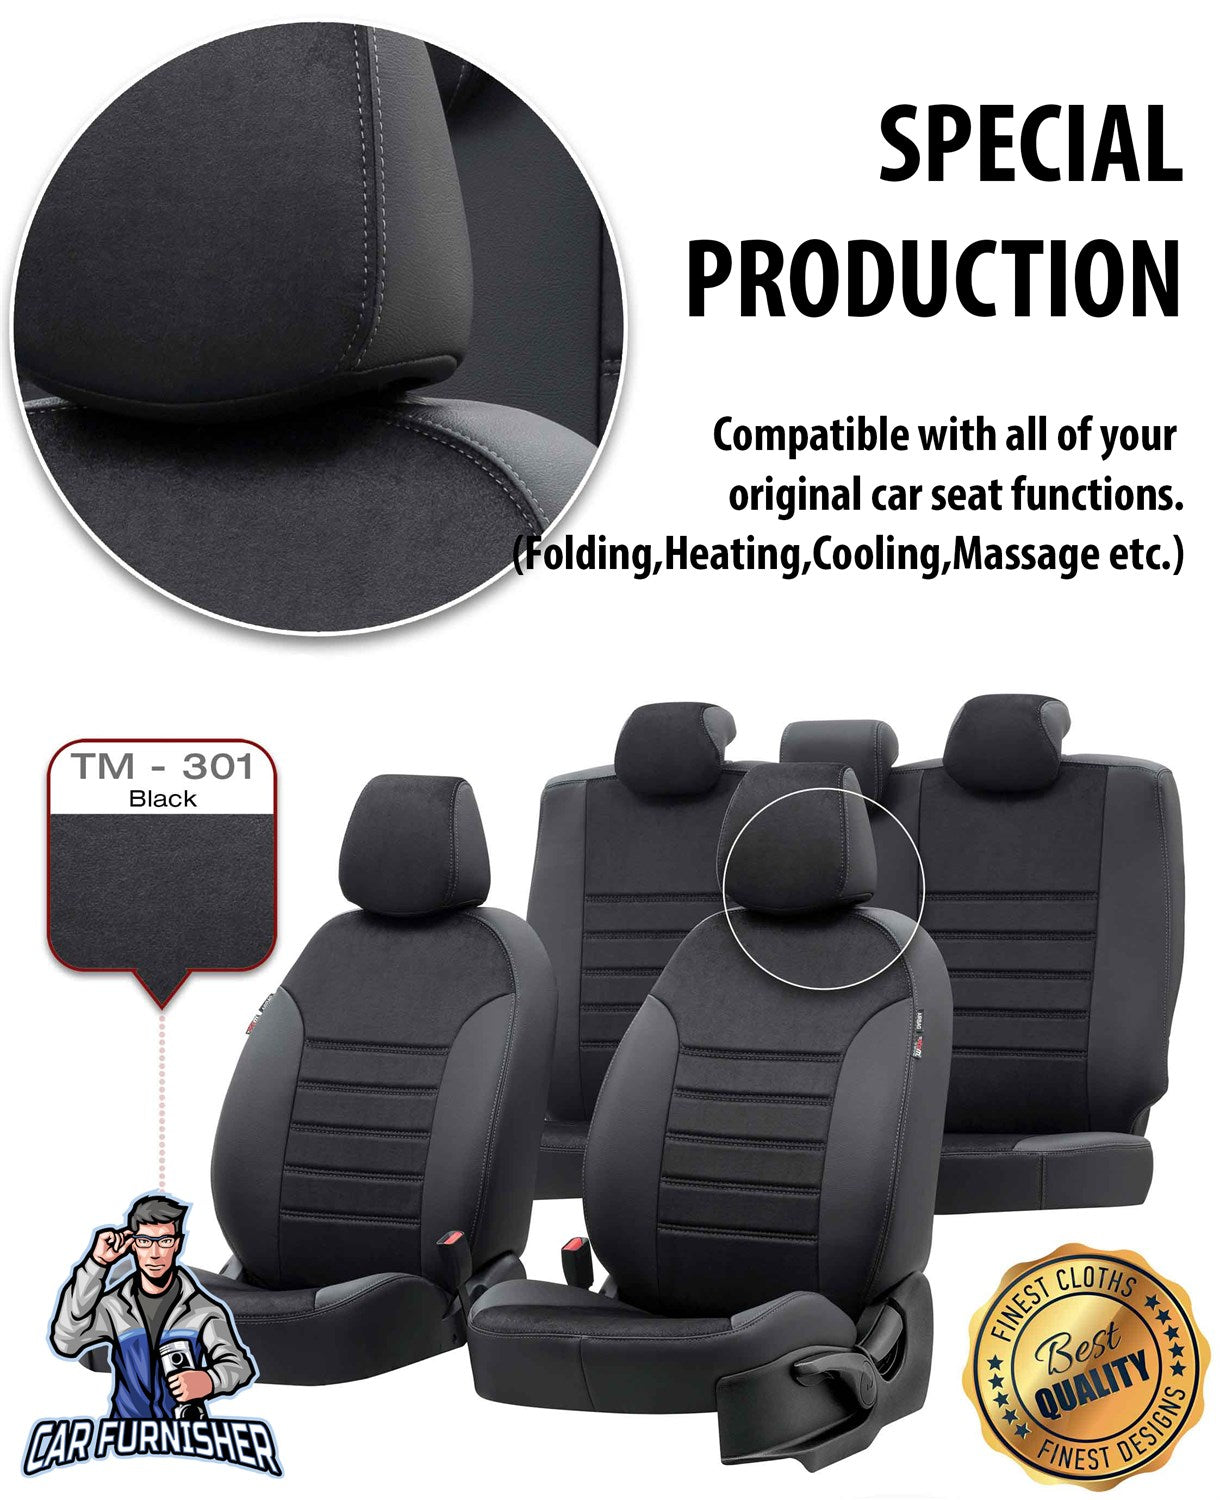 Dfm Succe Seat Covers Milano Suede Design Smoked Black Leather & Suede Fabric